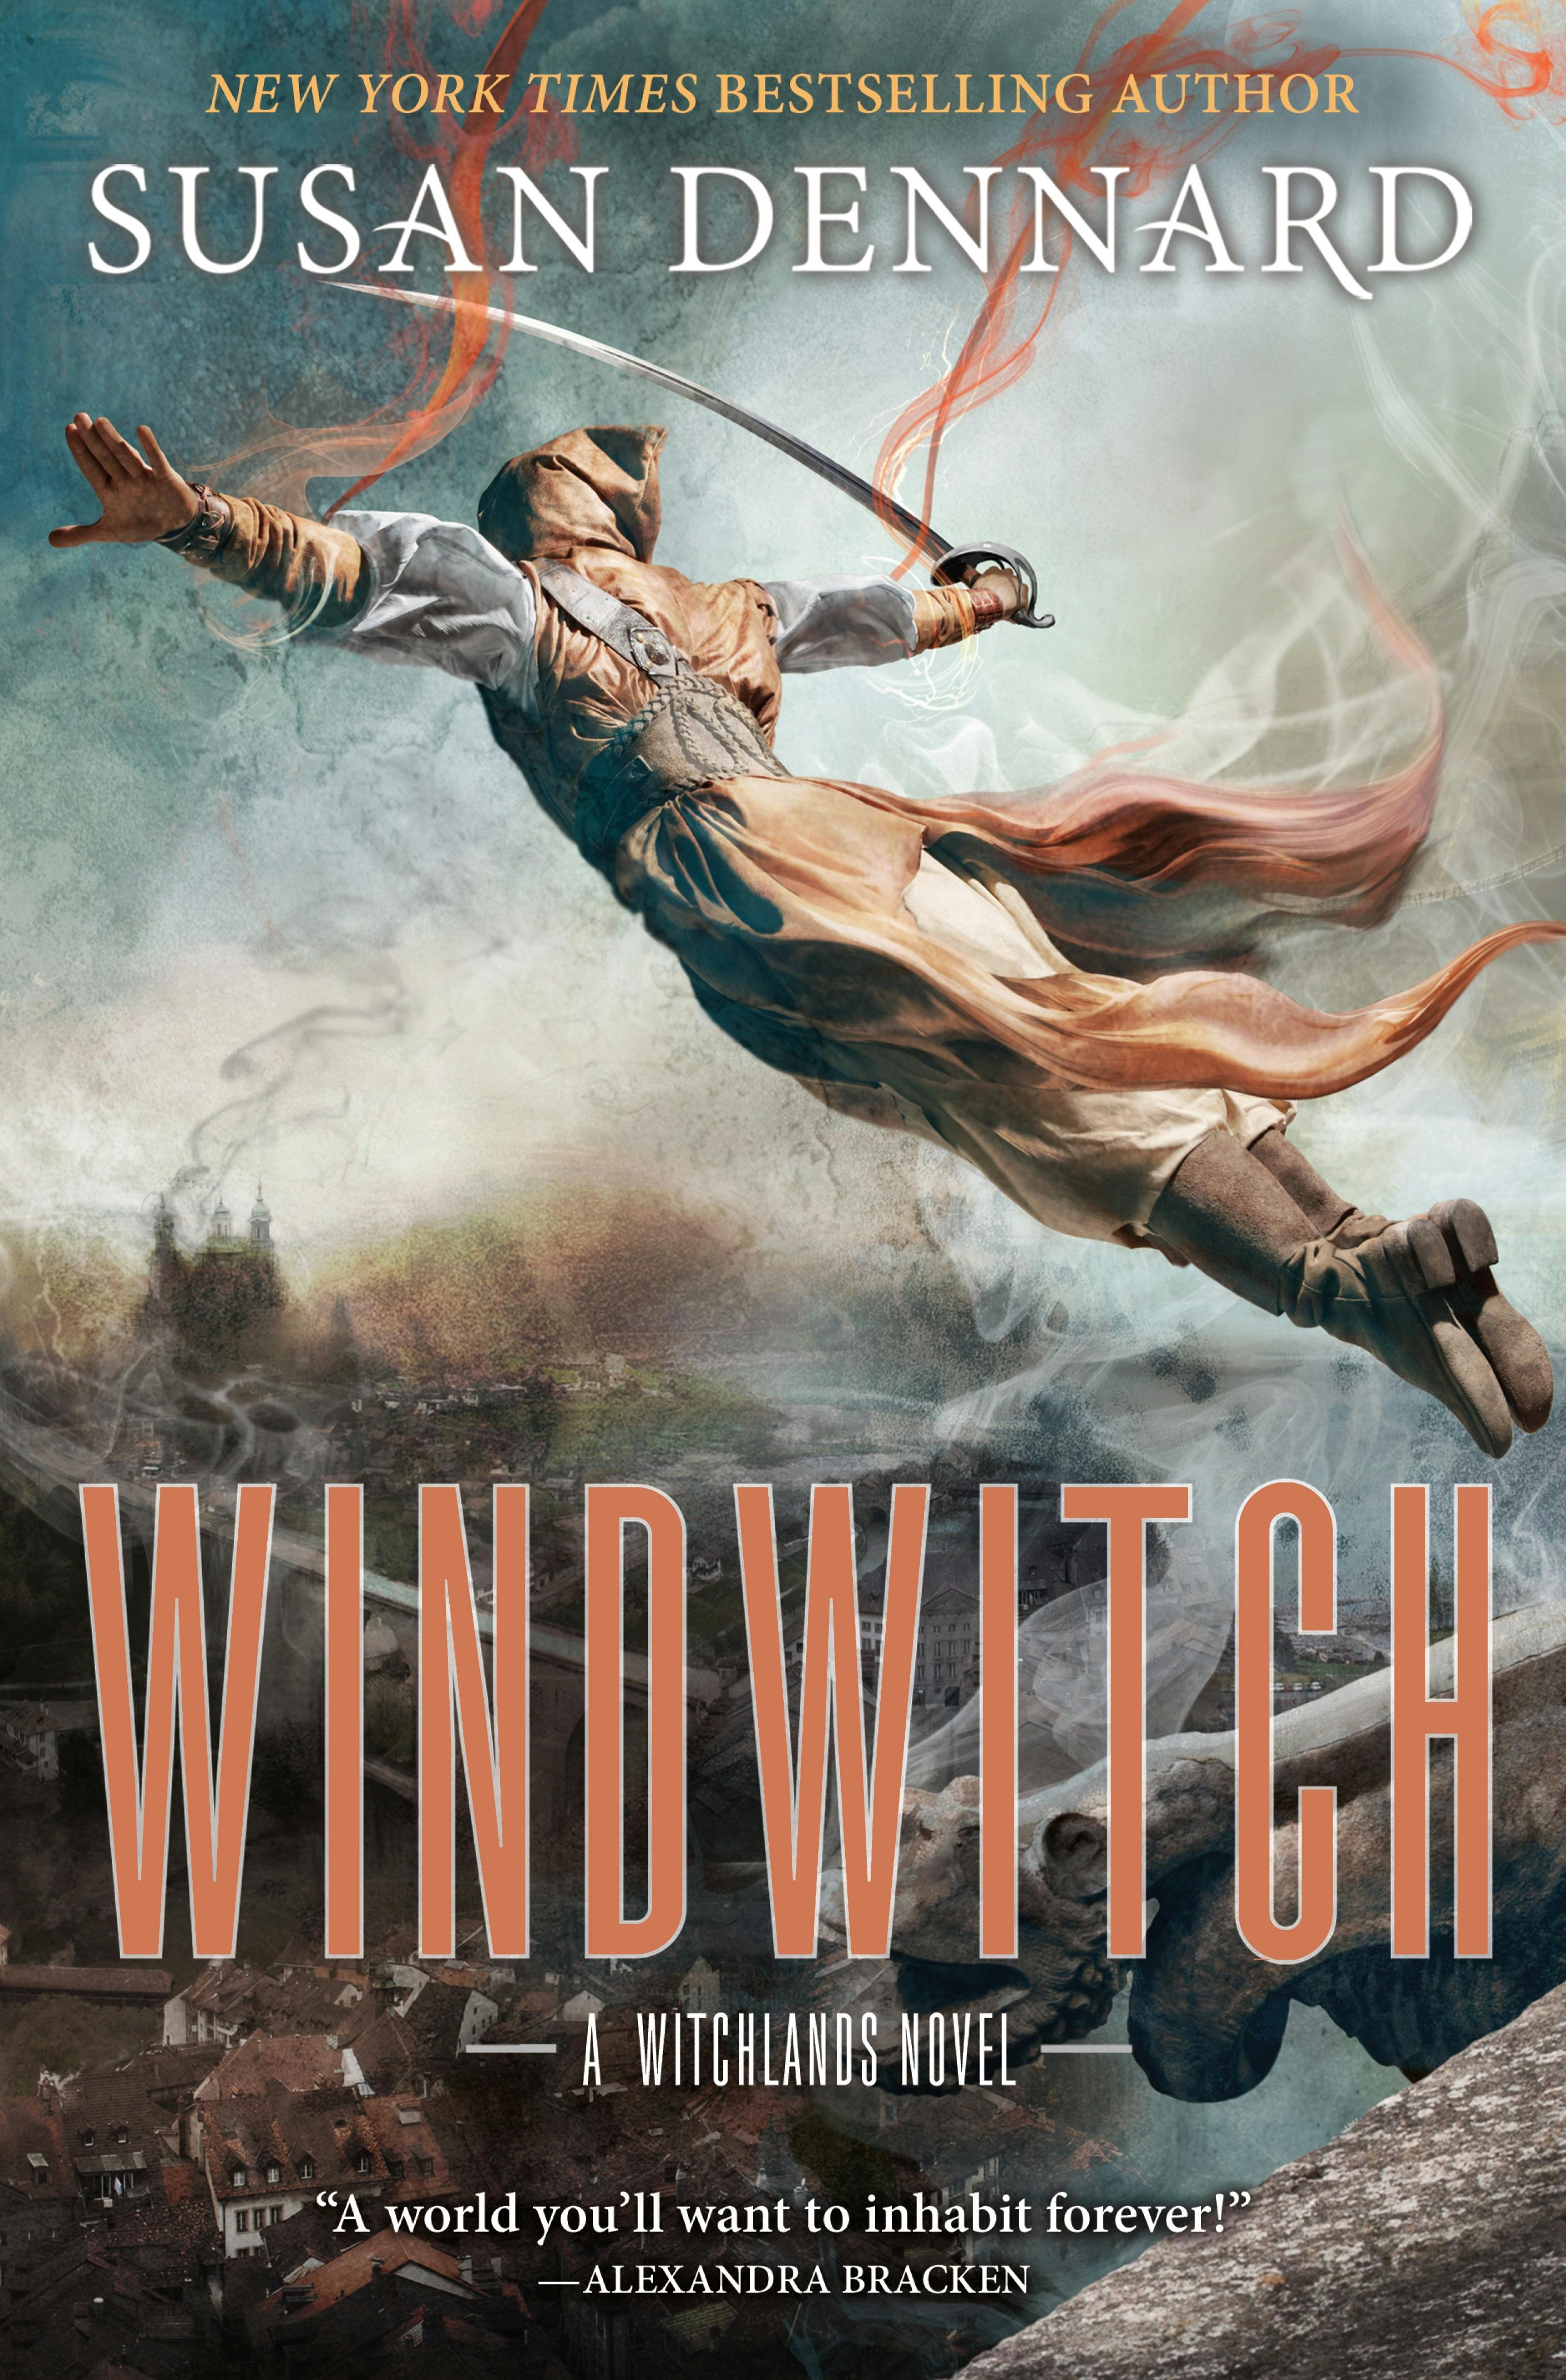 Cover for the book titled as: Windwitch